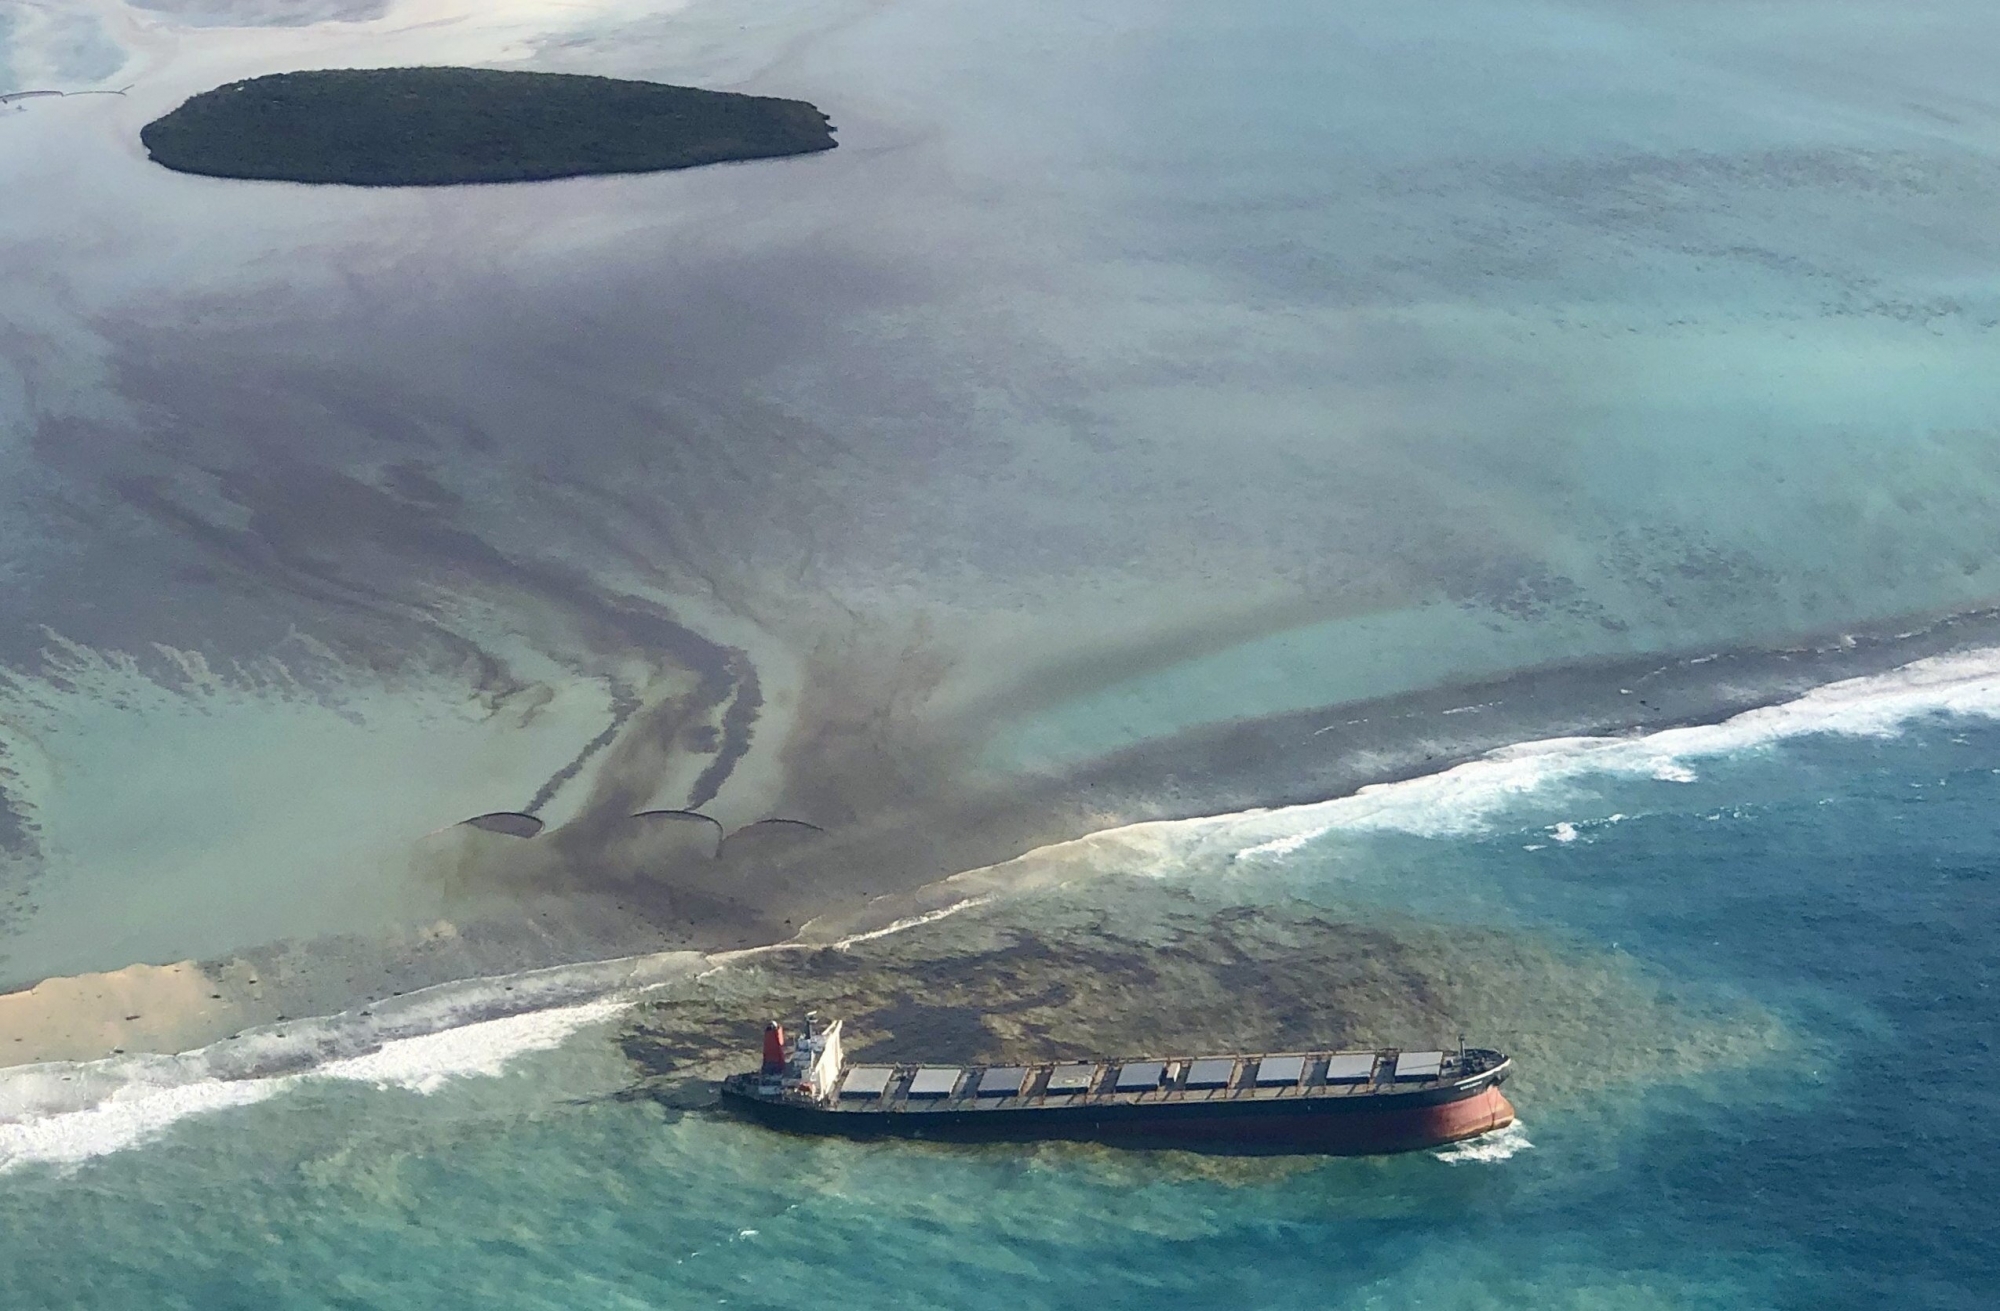 This photo taken and provided by Eric Villars shows oil leaking from the MV Wakashio, a bulk carrier ship that recently ran aground off the southeast coast of Mauritius, Friday, Aug. 7, 2020. Anxious residents of the Indian Ocean island nation of Mauritius are stuffing fabric sacks with sugar cane leaves to create makeshift oil spill barriers as tons of fuel leak from a grounded ship. The government has declared an environmental emergency and France says it is sending help from its nearby Reunion island. (Eric Villars via AP) ArcInfo